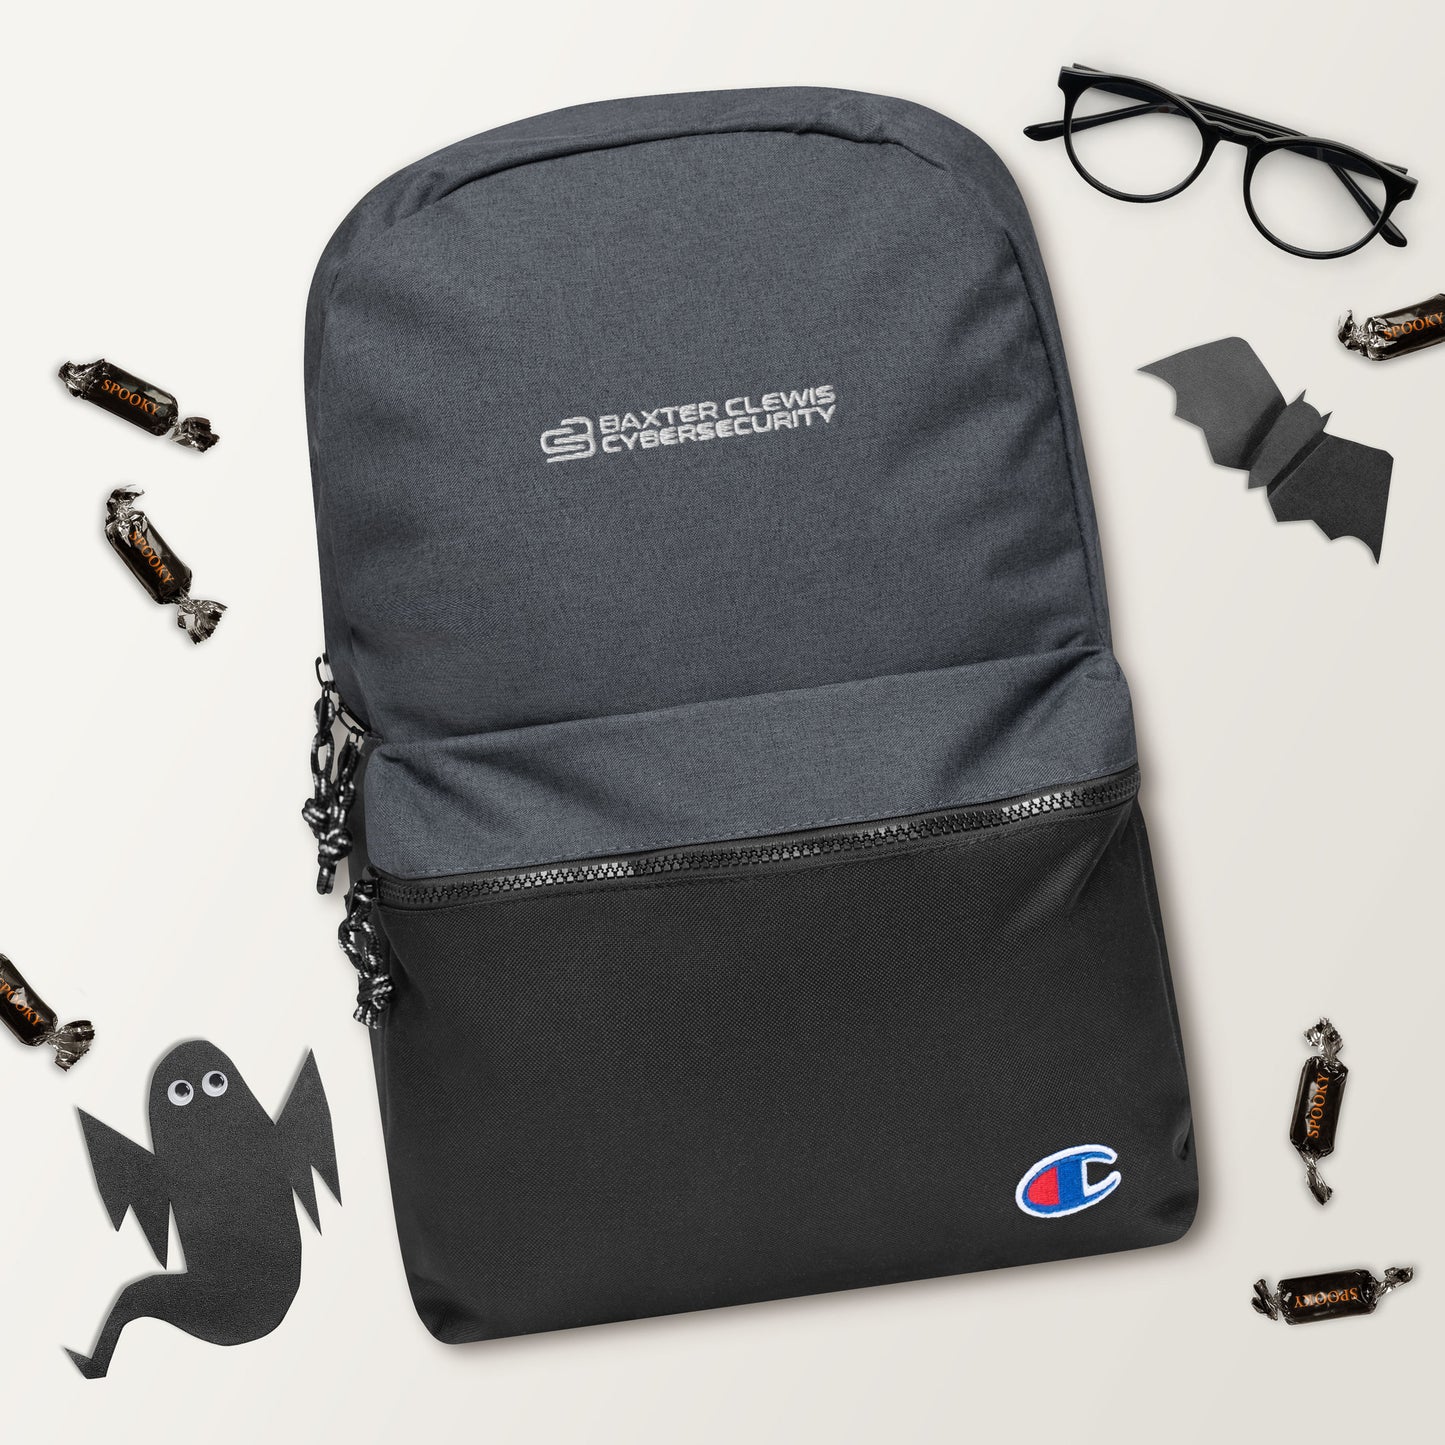 Baxter Clewis Cybersecurity Embroidered Champion Backpack